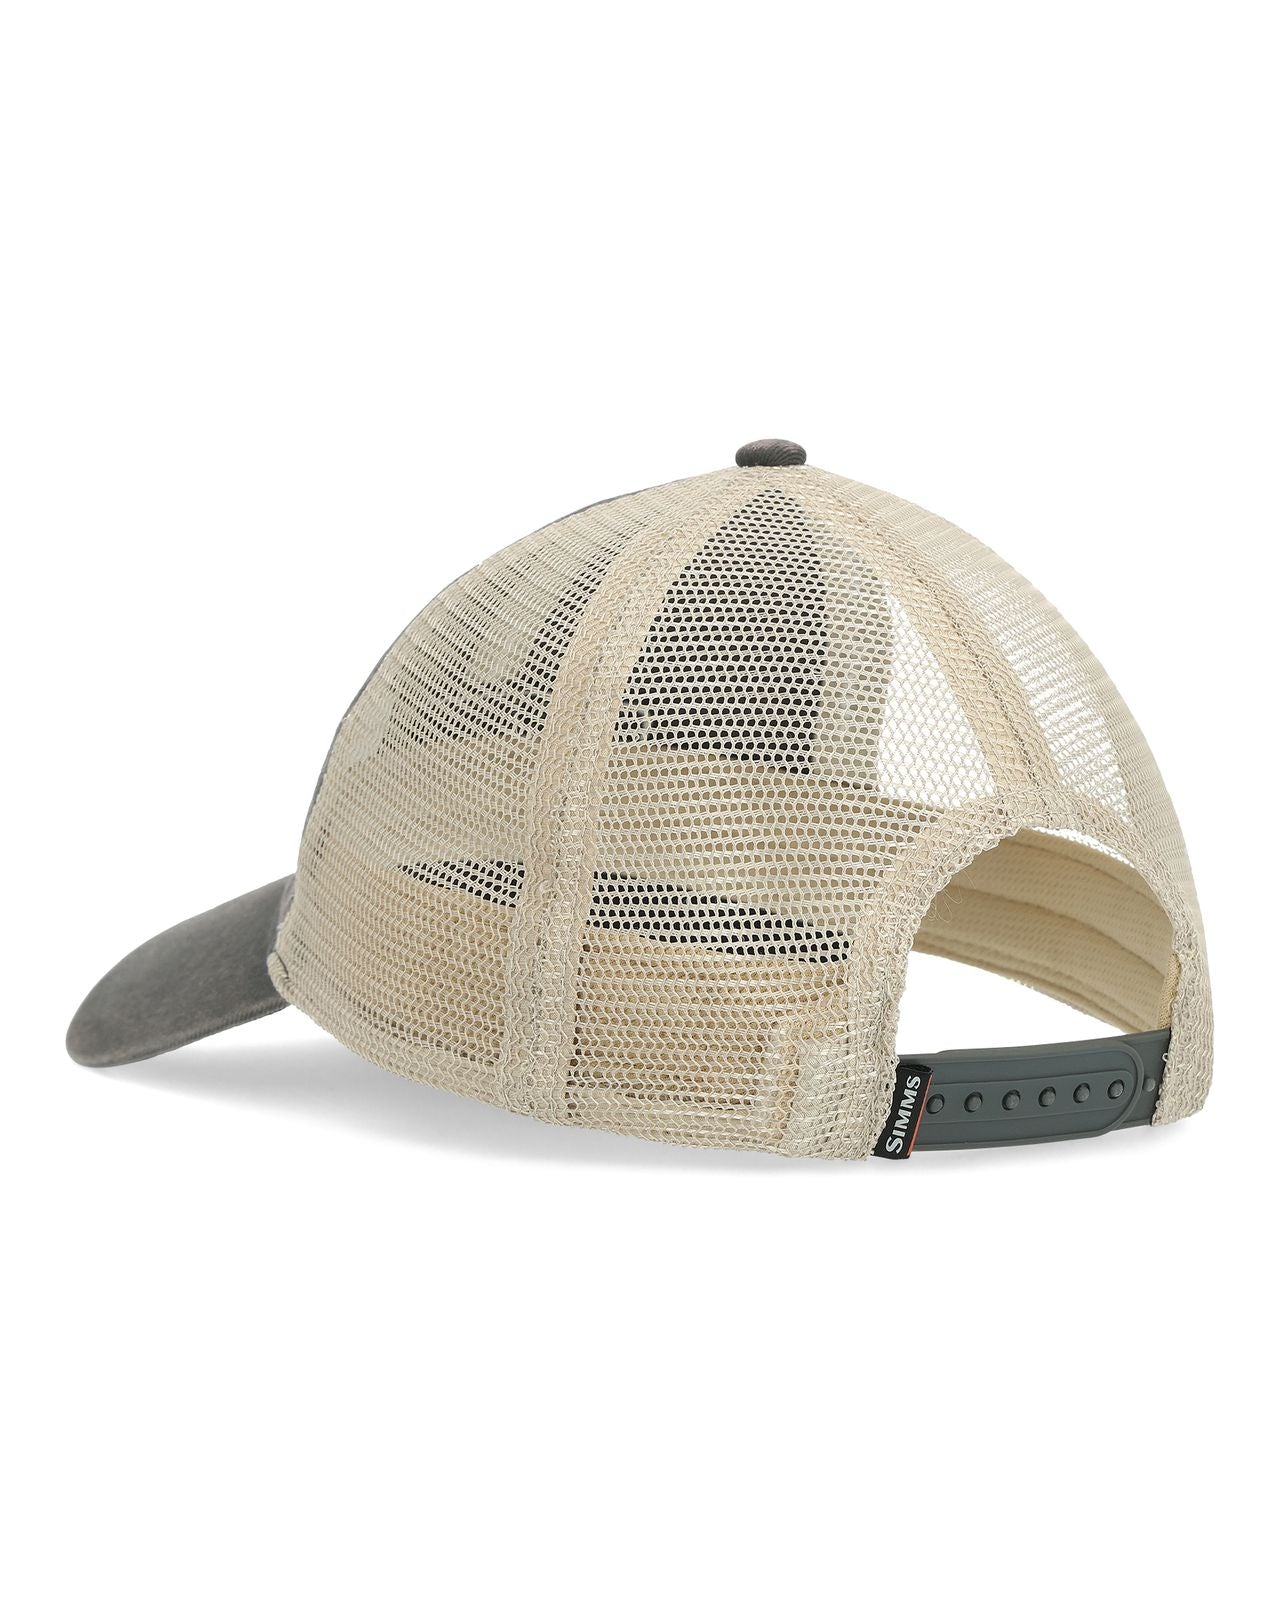 SIMMS HERITAGE TRUCKER CARBON